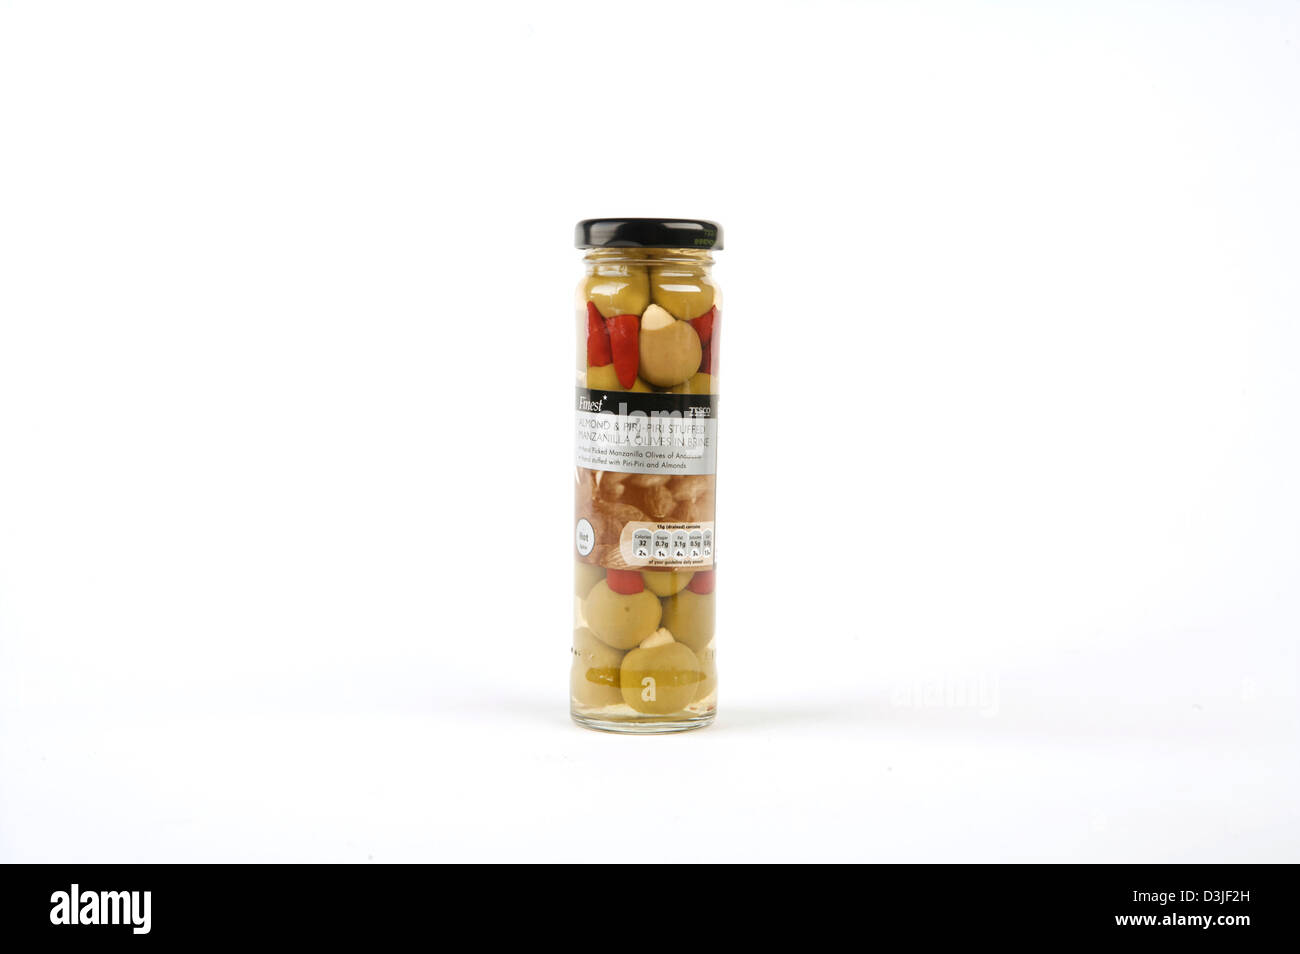 Tesco Finest Olives in a tall glass jar Stock Photo